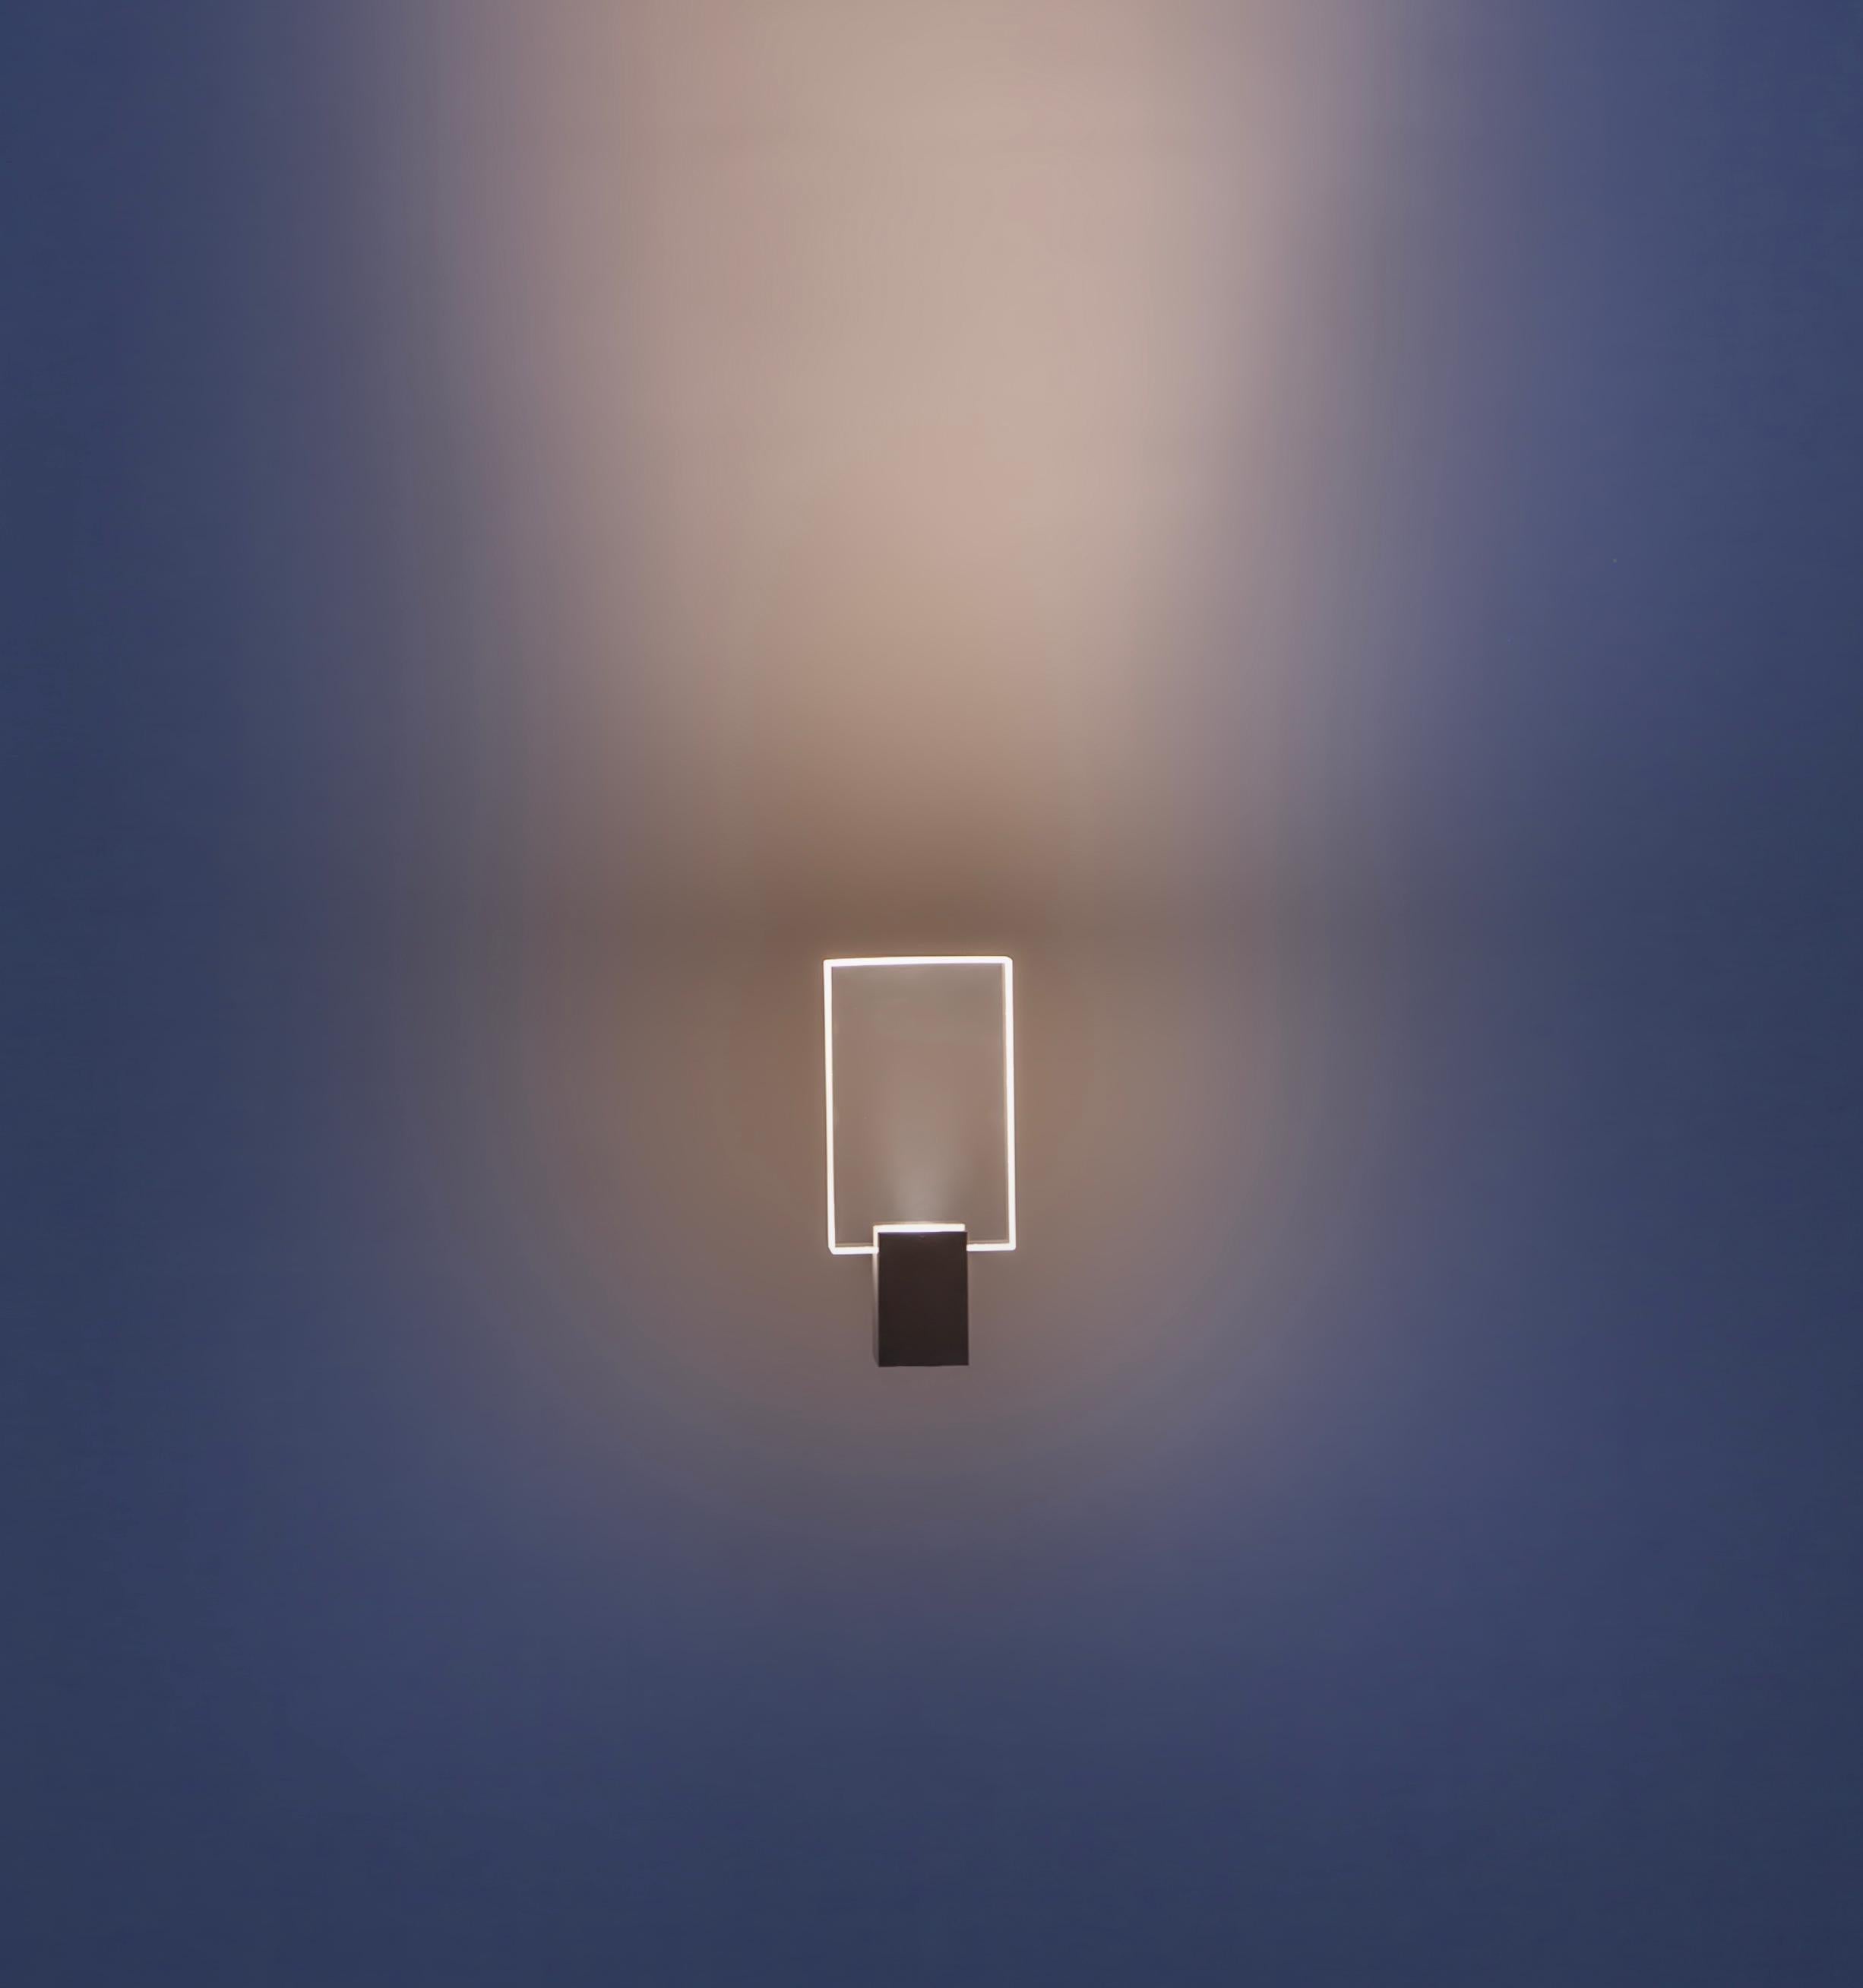 The small rectangle window light sculpture is a part of the window series from optical Monuments - a collection exploring the intersection of refraction, diffusion, transparency, and myth. The Window series uses optics by manipulating light to